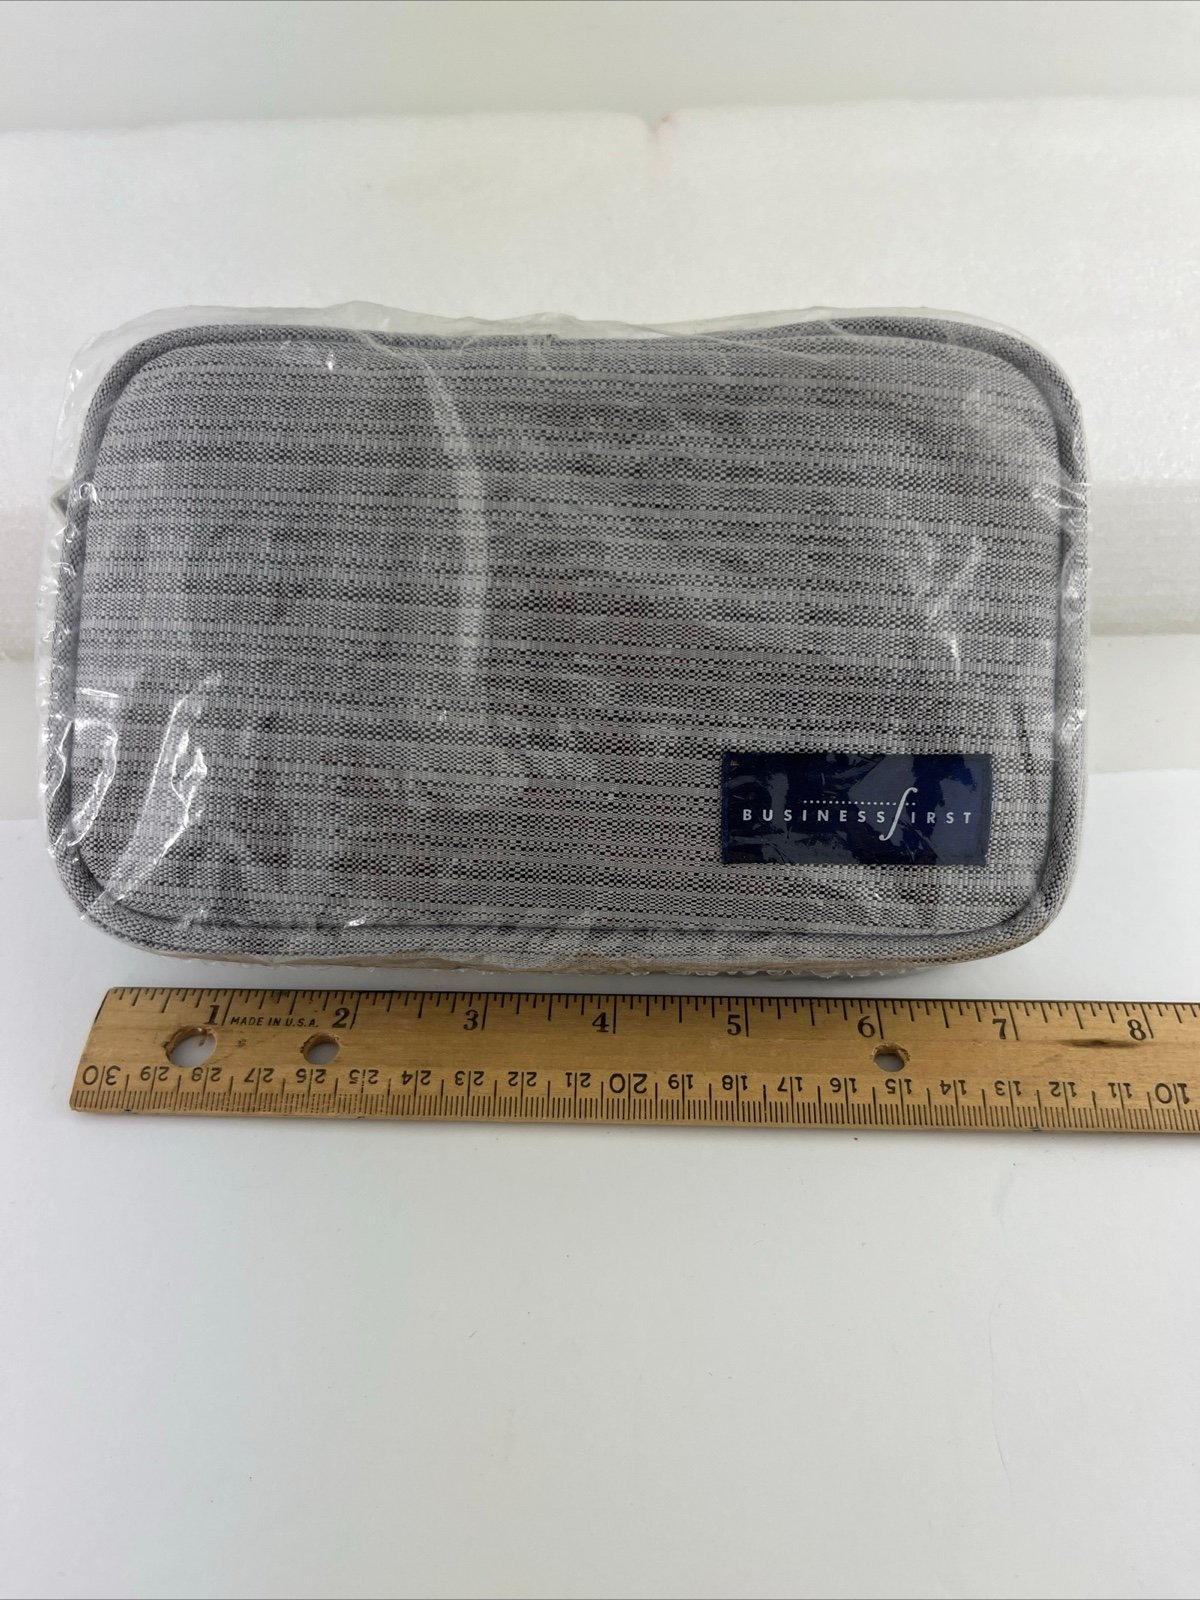 Continental Airlines First Class Complimentary Amenity Kit 5 VTG Travel Bag New BUxgR6dLT